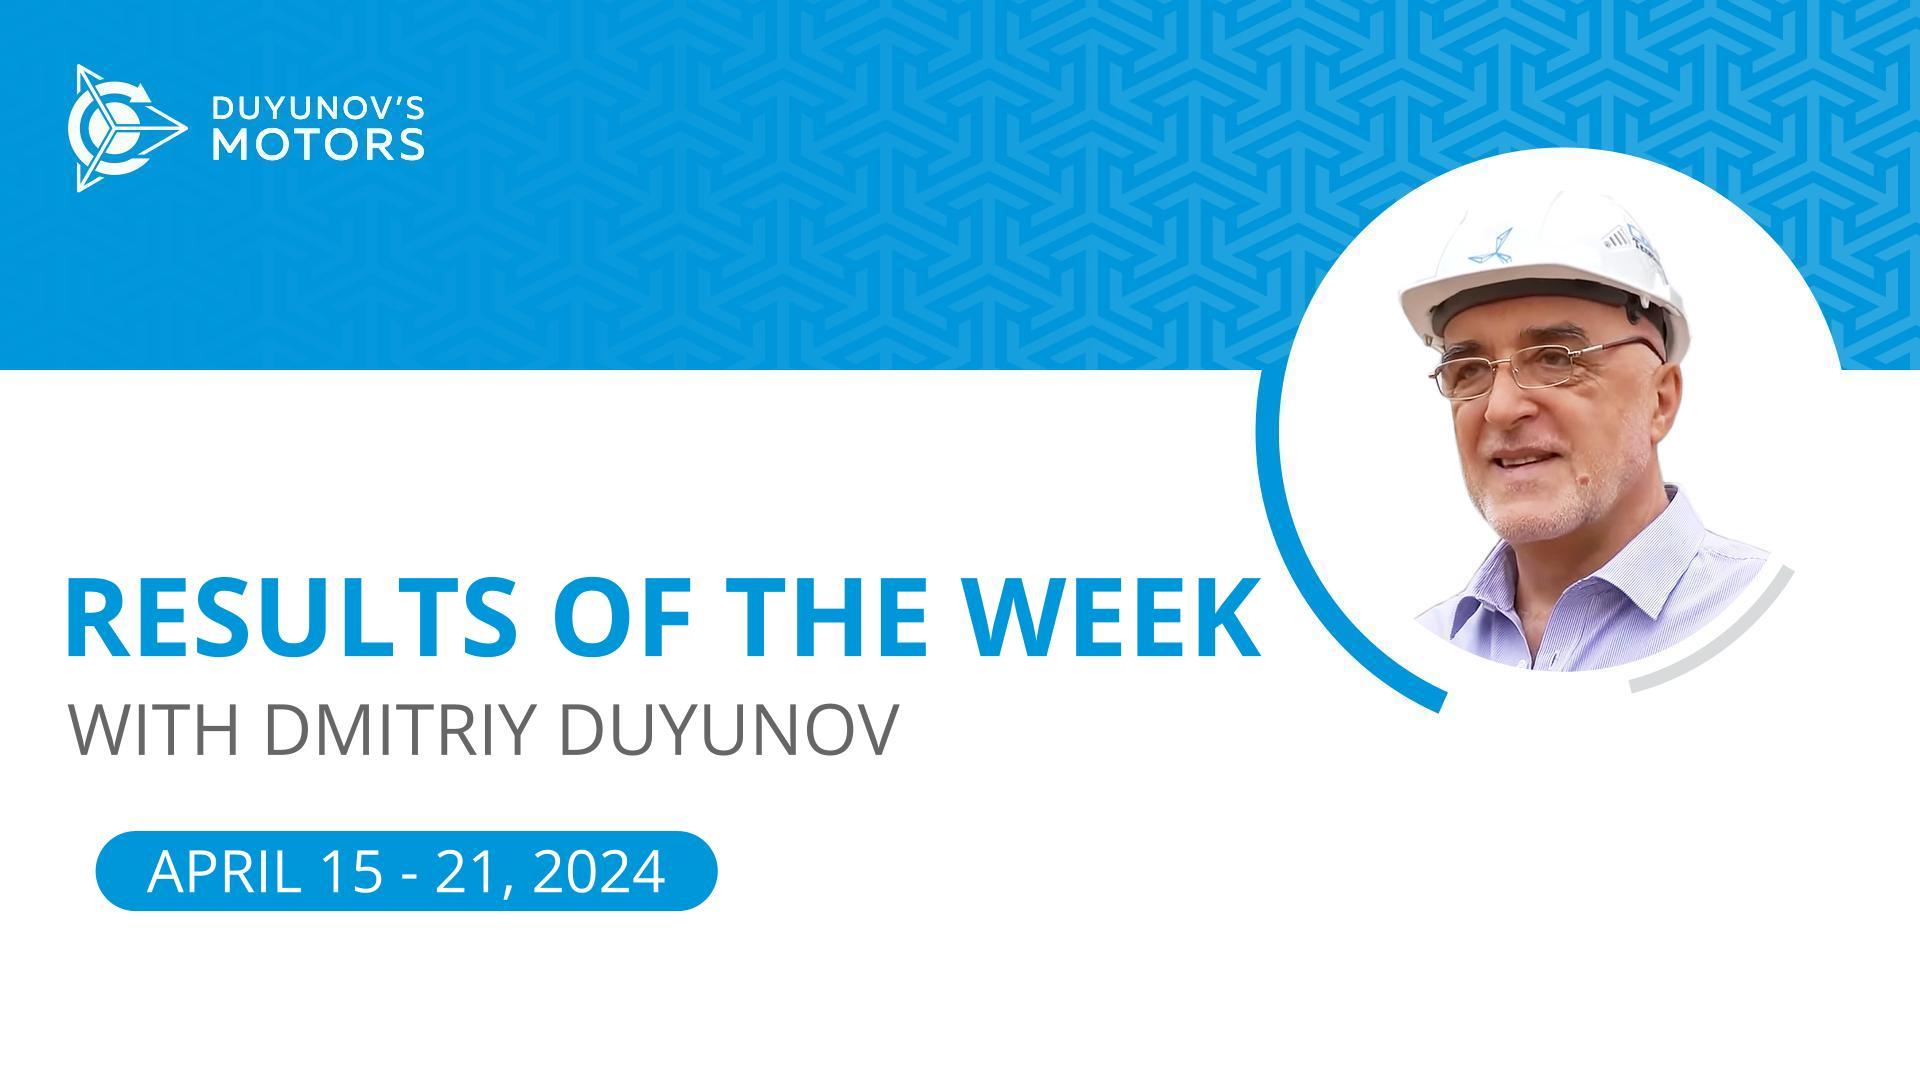 Results of the week in the project "Duyunov's motors"